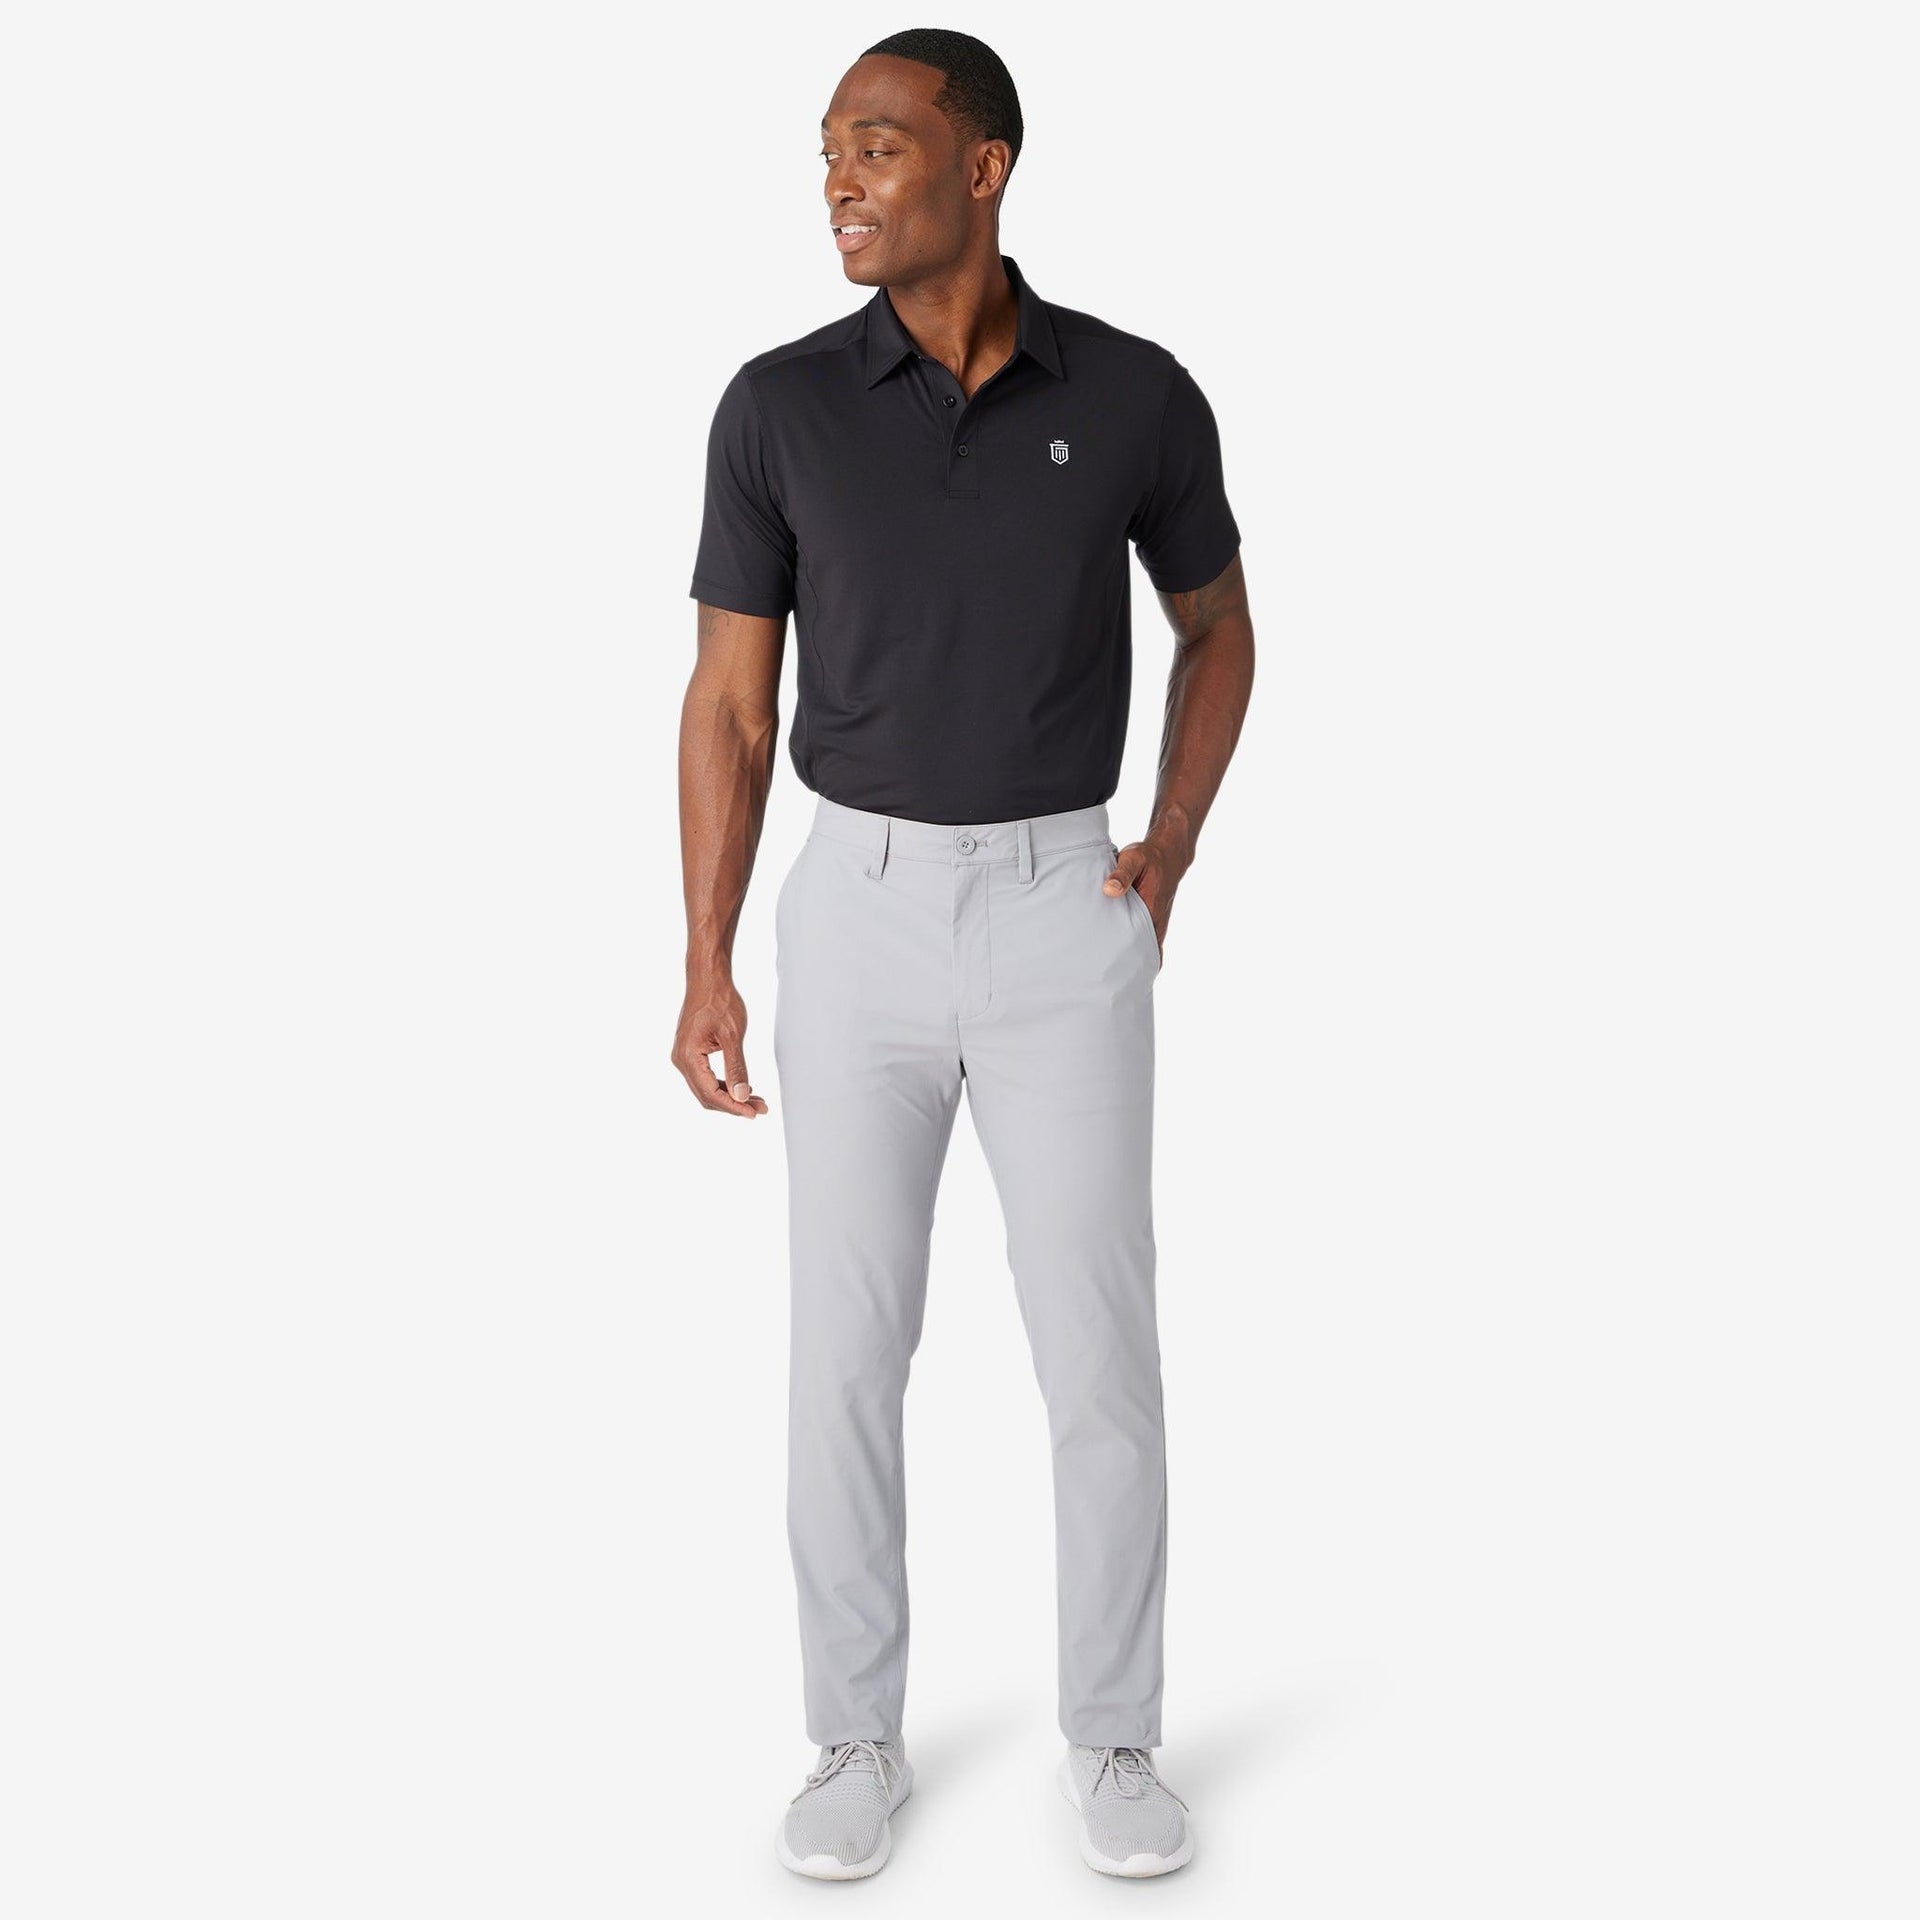 clubhouse pant Gray 32x32